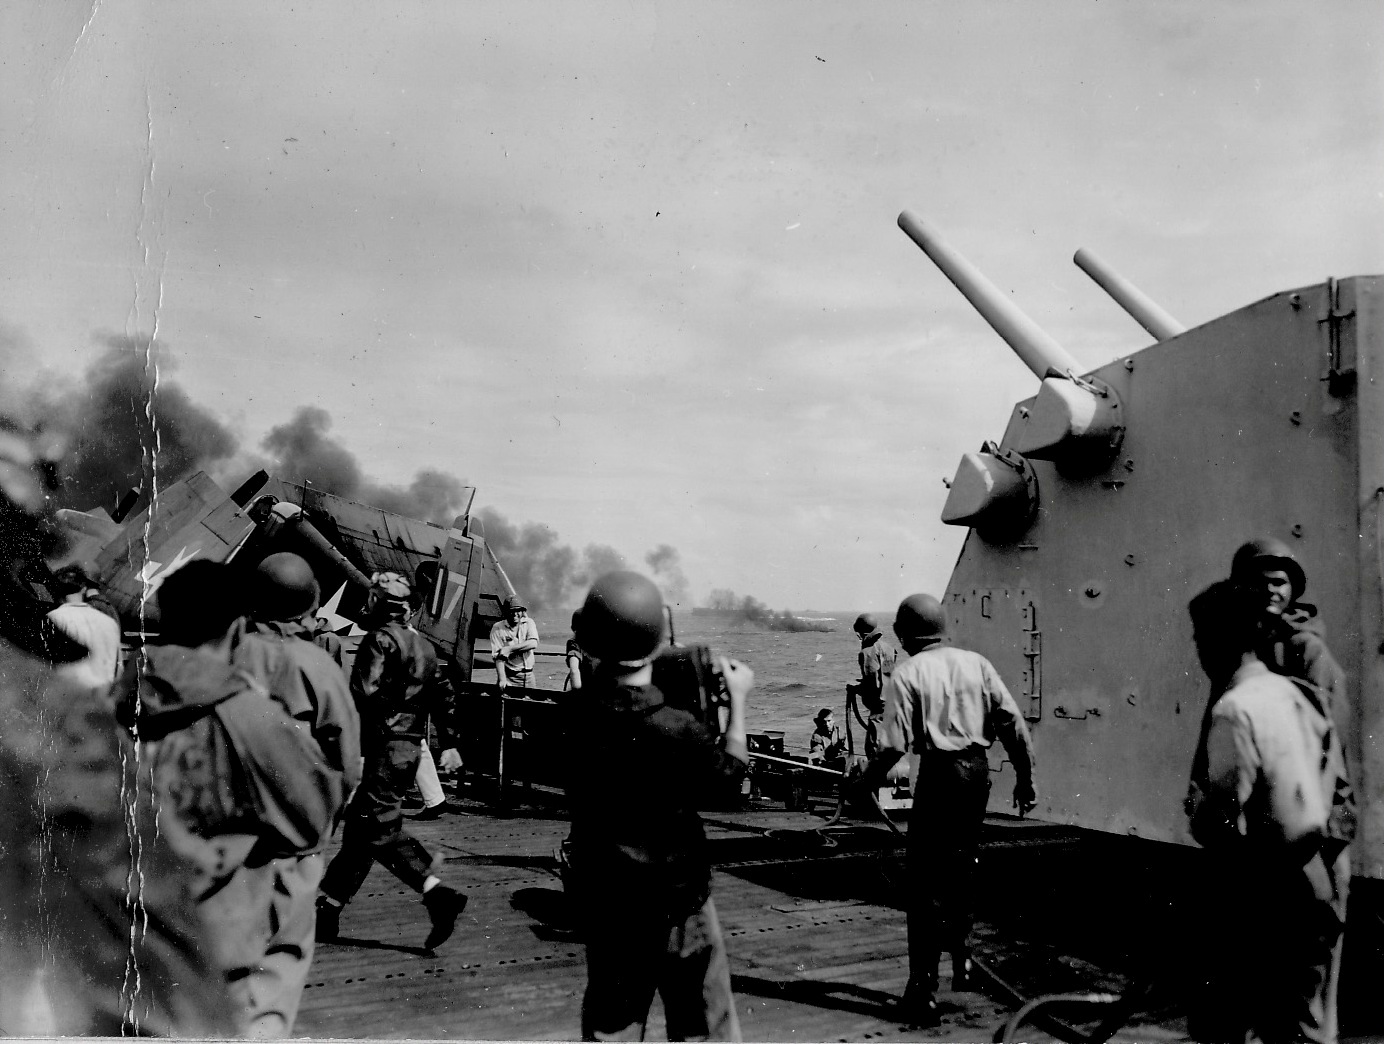 Activity continues on the flight deck of USS Essex as a crashed Japanese airplane burns off the starboard bow, 24 Oct 1944 off Luzon in the Philippines. Note Number 1 5-inch/38 caliber gun mount at right.